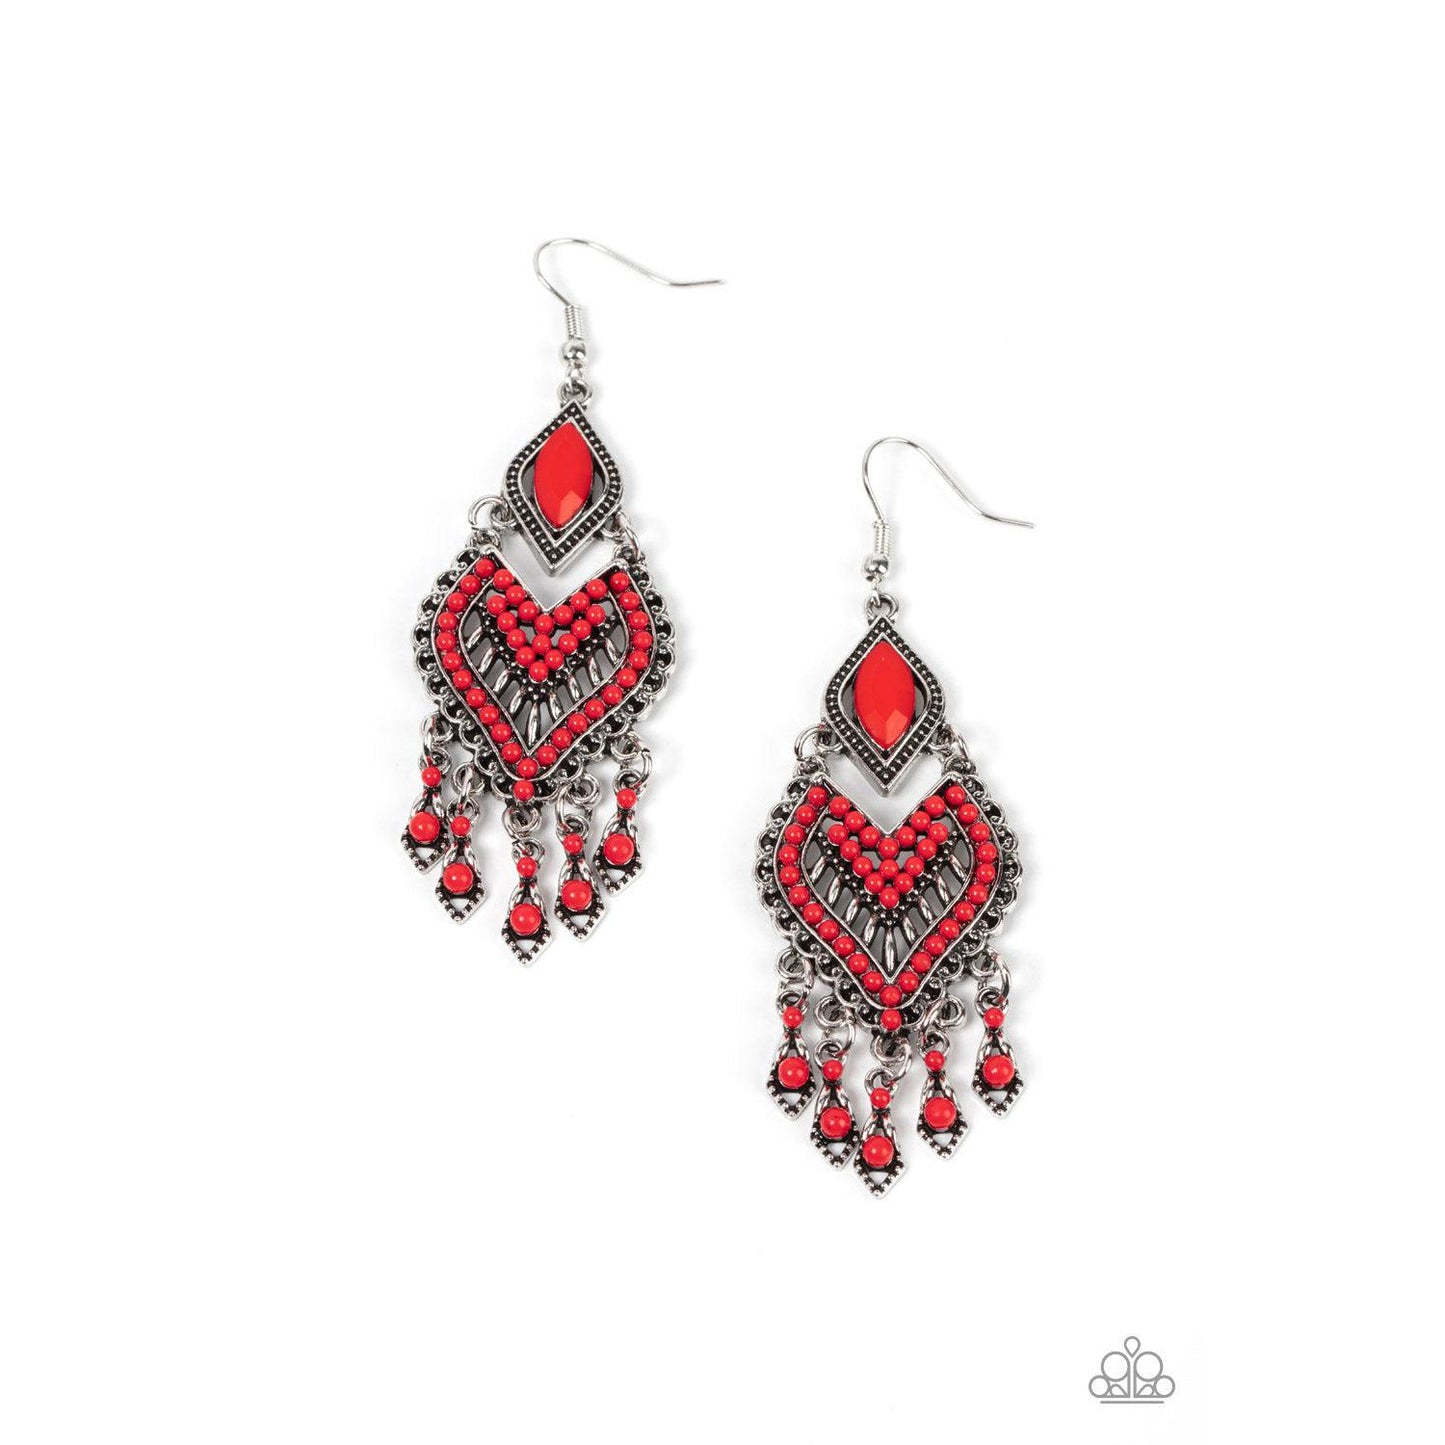 Dearly Debonair - Red Earrings - A Large Selection Hand-Chains And Jewelry On rainbowartsreview,Women's Jewelry | Necklaces, Earrings, Bracelets